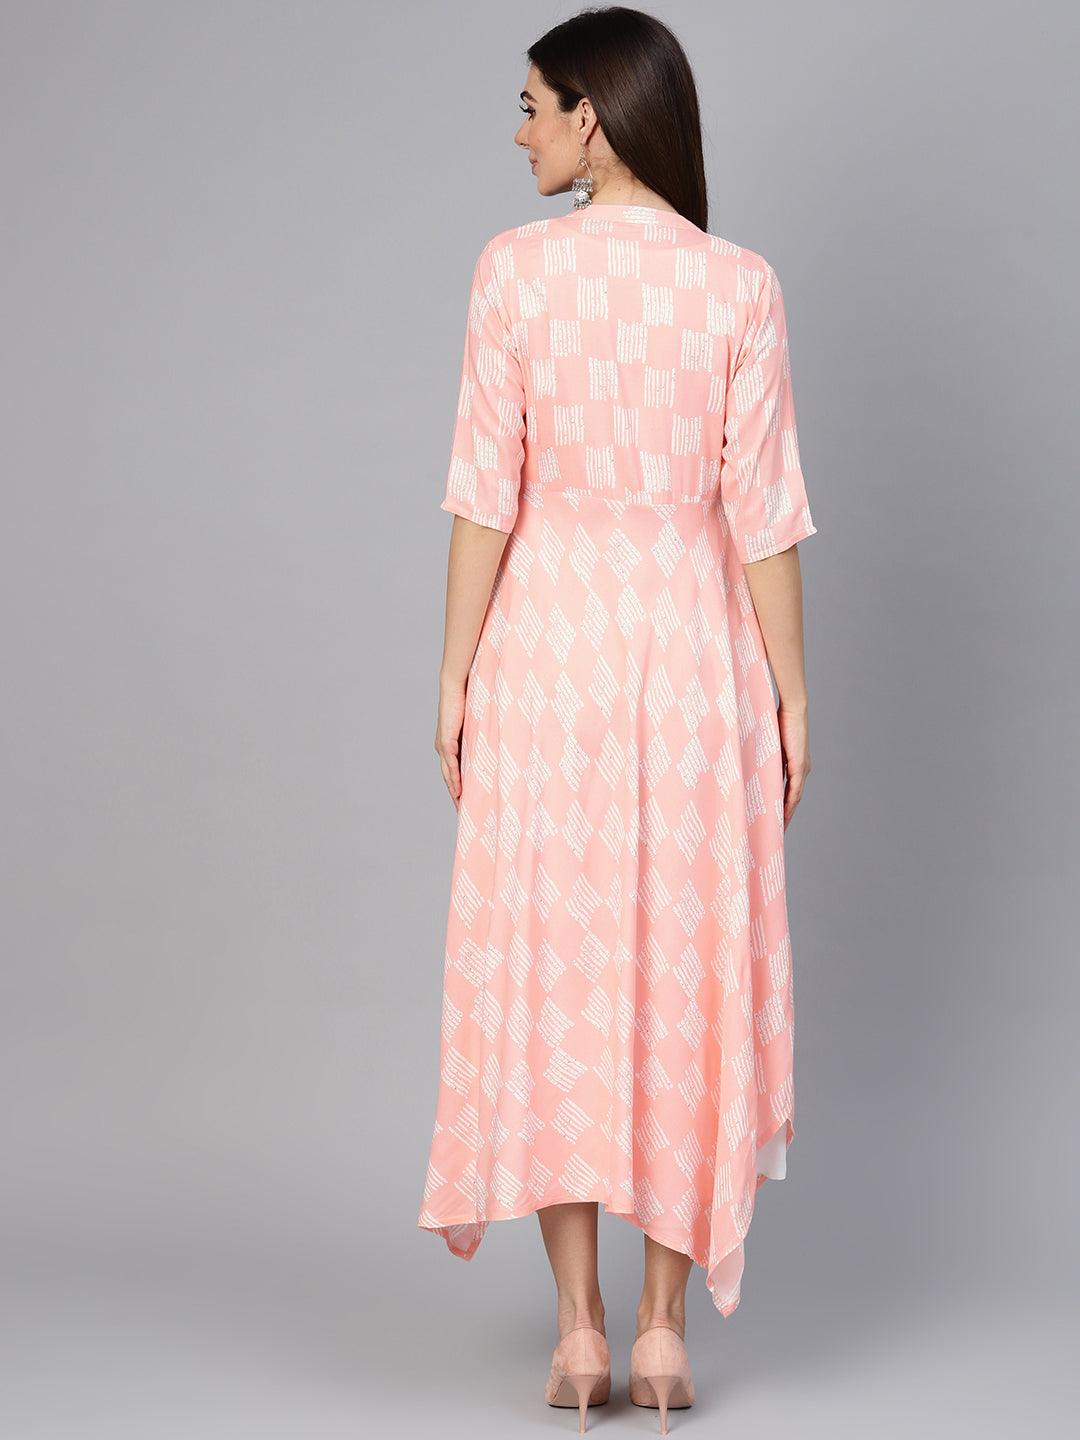 Pink Printed Rayon Dress With Jacket